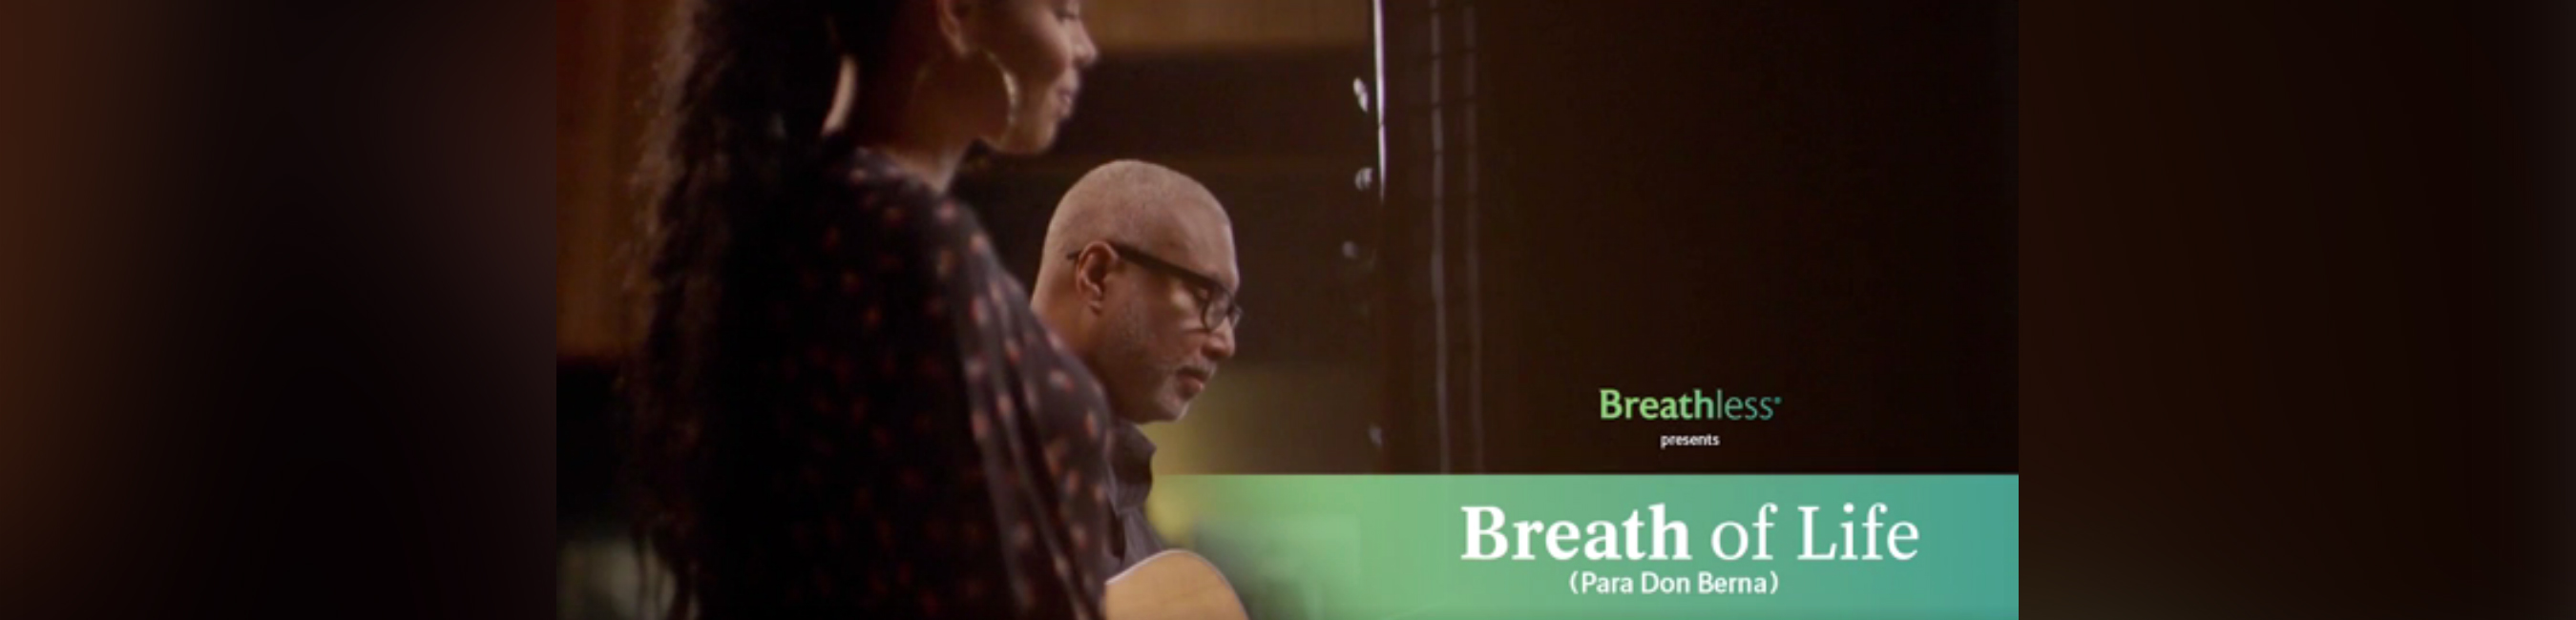 “Breath of Life (Para don Berna)” includes lyrics from David DePinho and music from Bernie Williams and Jordin Sparks